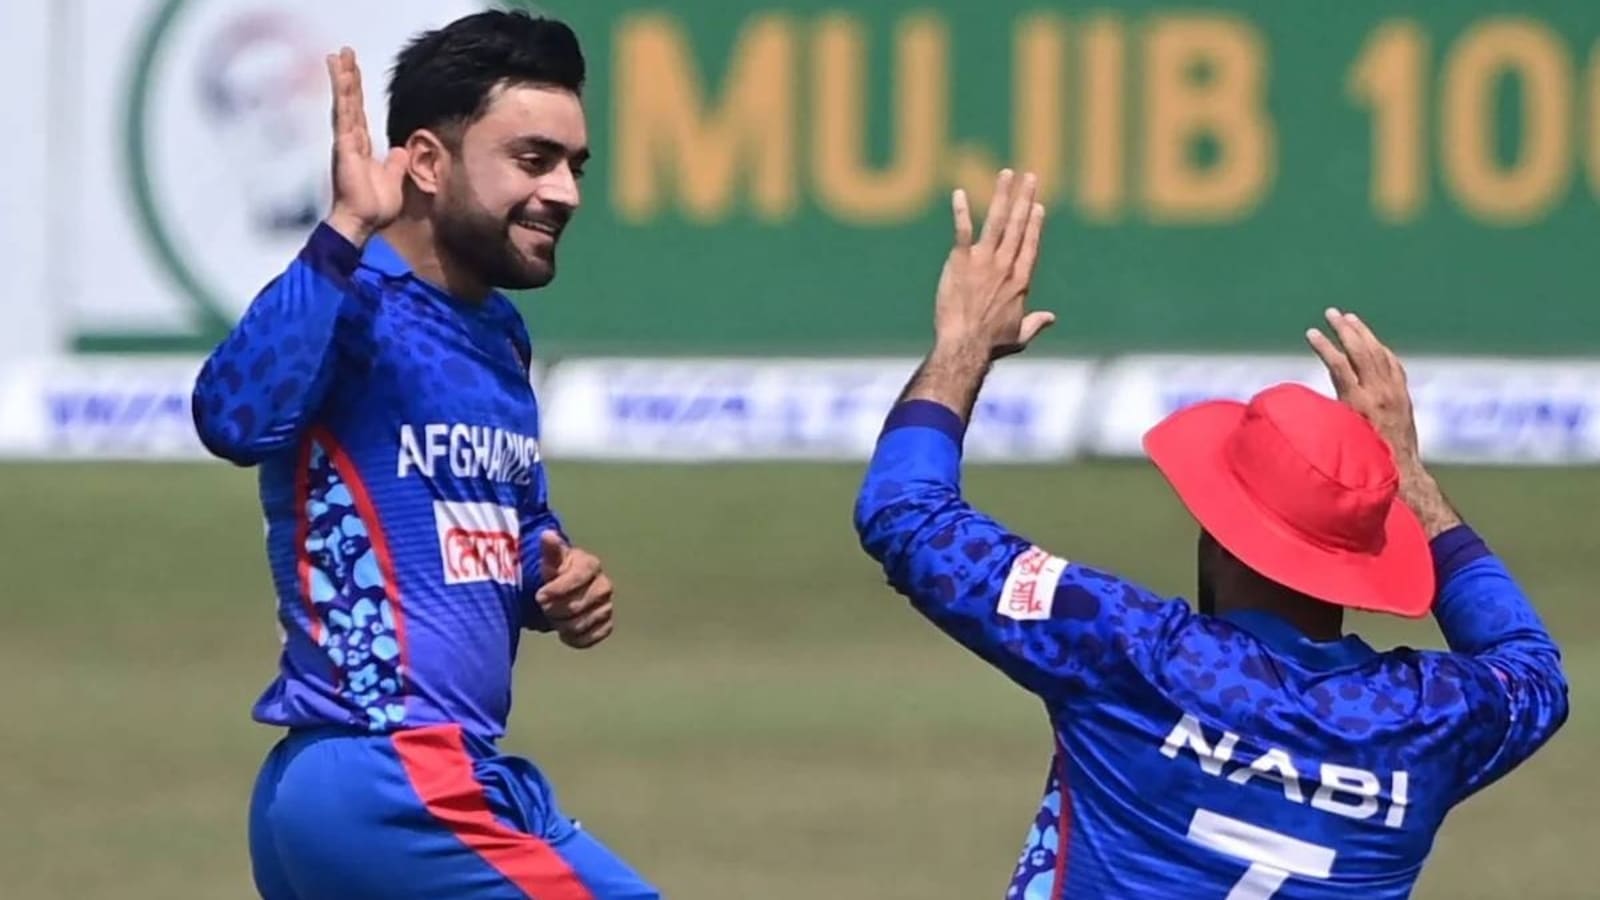 sri-lanka-vs-afghanistan-live-score-asia-cup-2022-sl-look-for-good-start-in-tricky-opener-against-afg-toss-at-7pm